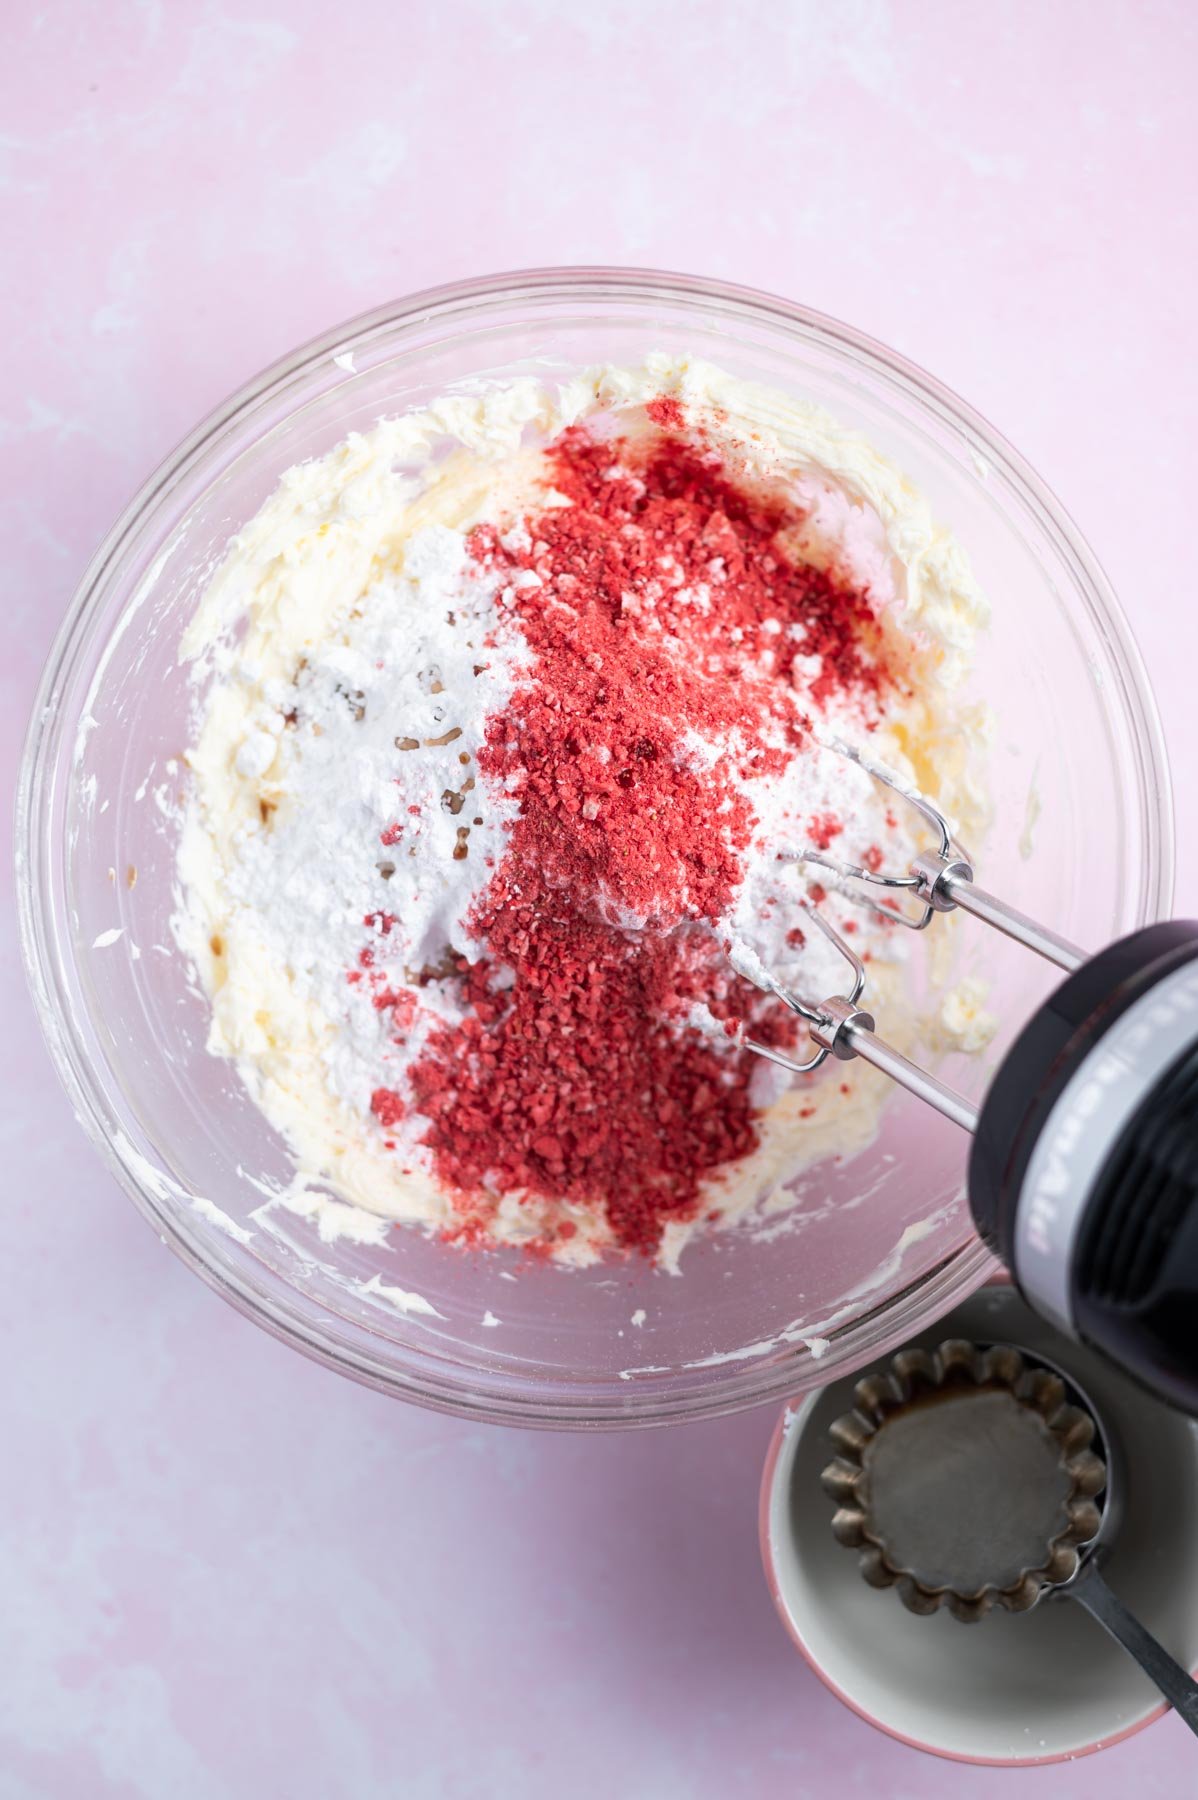 confectioners' sugar, freeze dried strawberries and vanilla added to frosting ingredients